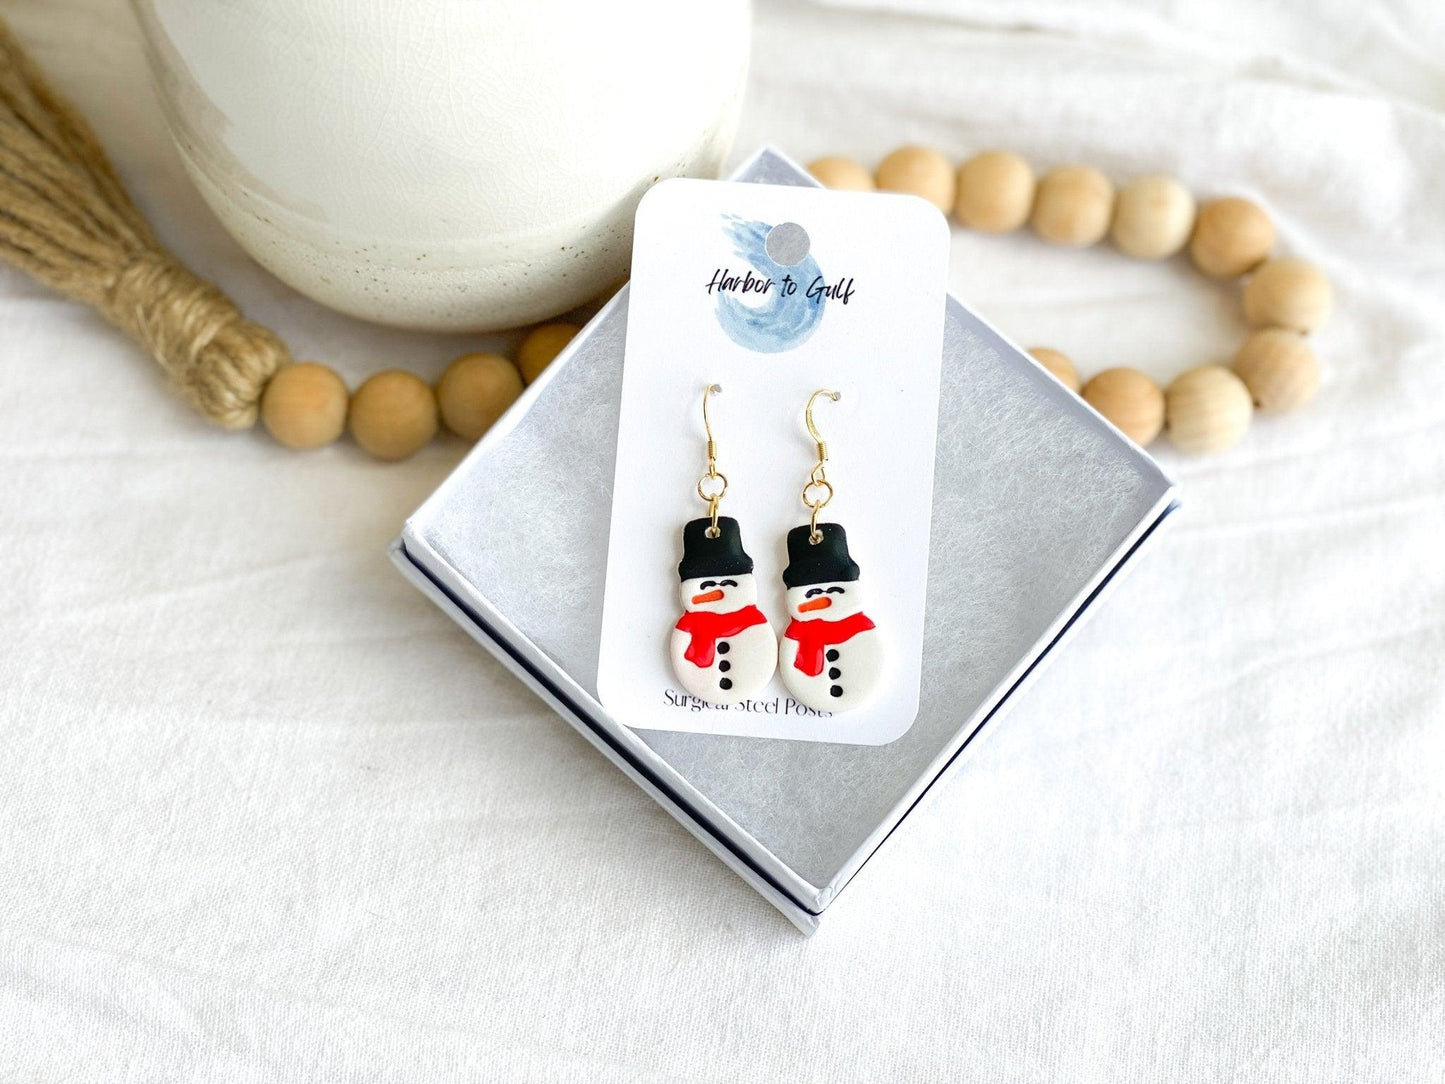 Cute Handmade Clay Snowman Earrings on Gold Ear Wires made from Surgical Steel on earring card in a white gift box